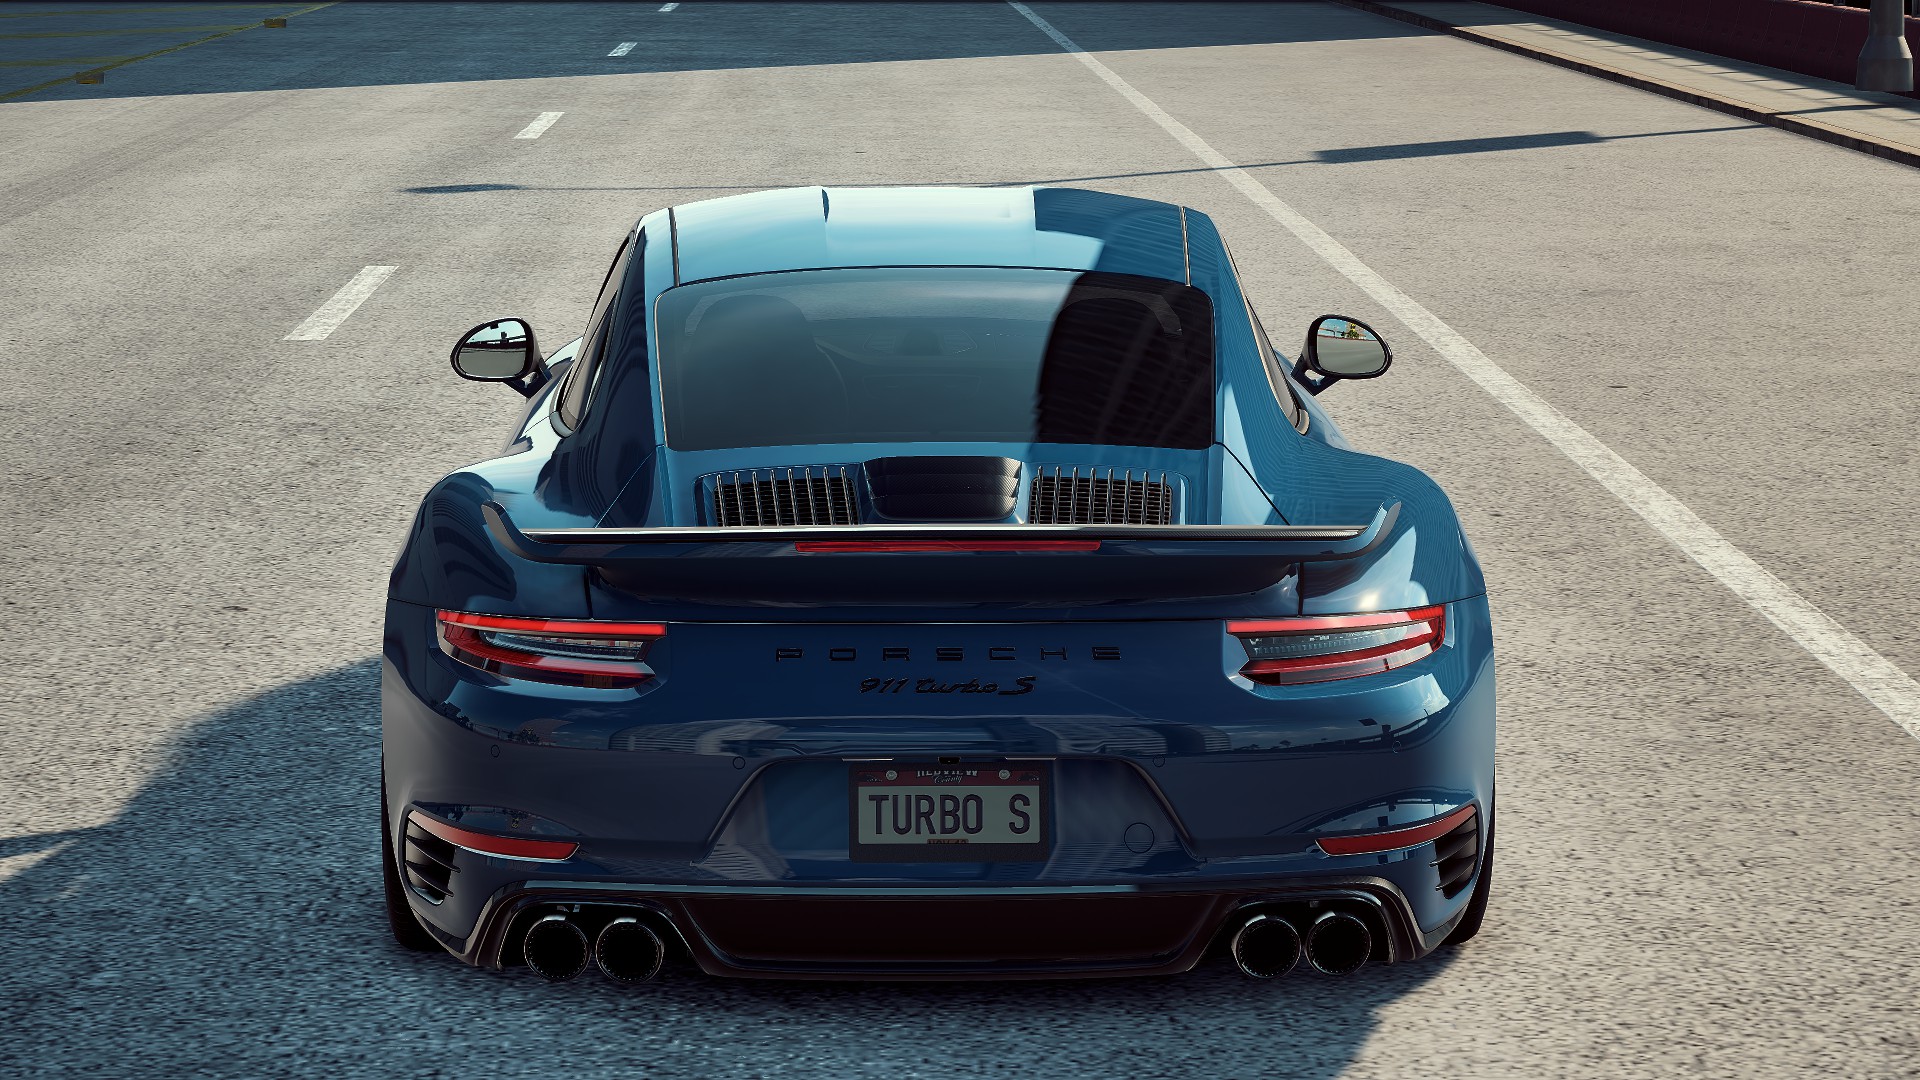 General 1920x1080 Porsche car 4K Need for Speed: Heat street view road city building turquoise Red Hot photoshoot rear view Porsche 911 video games